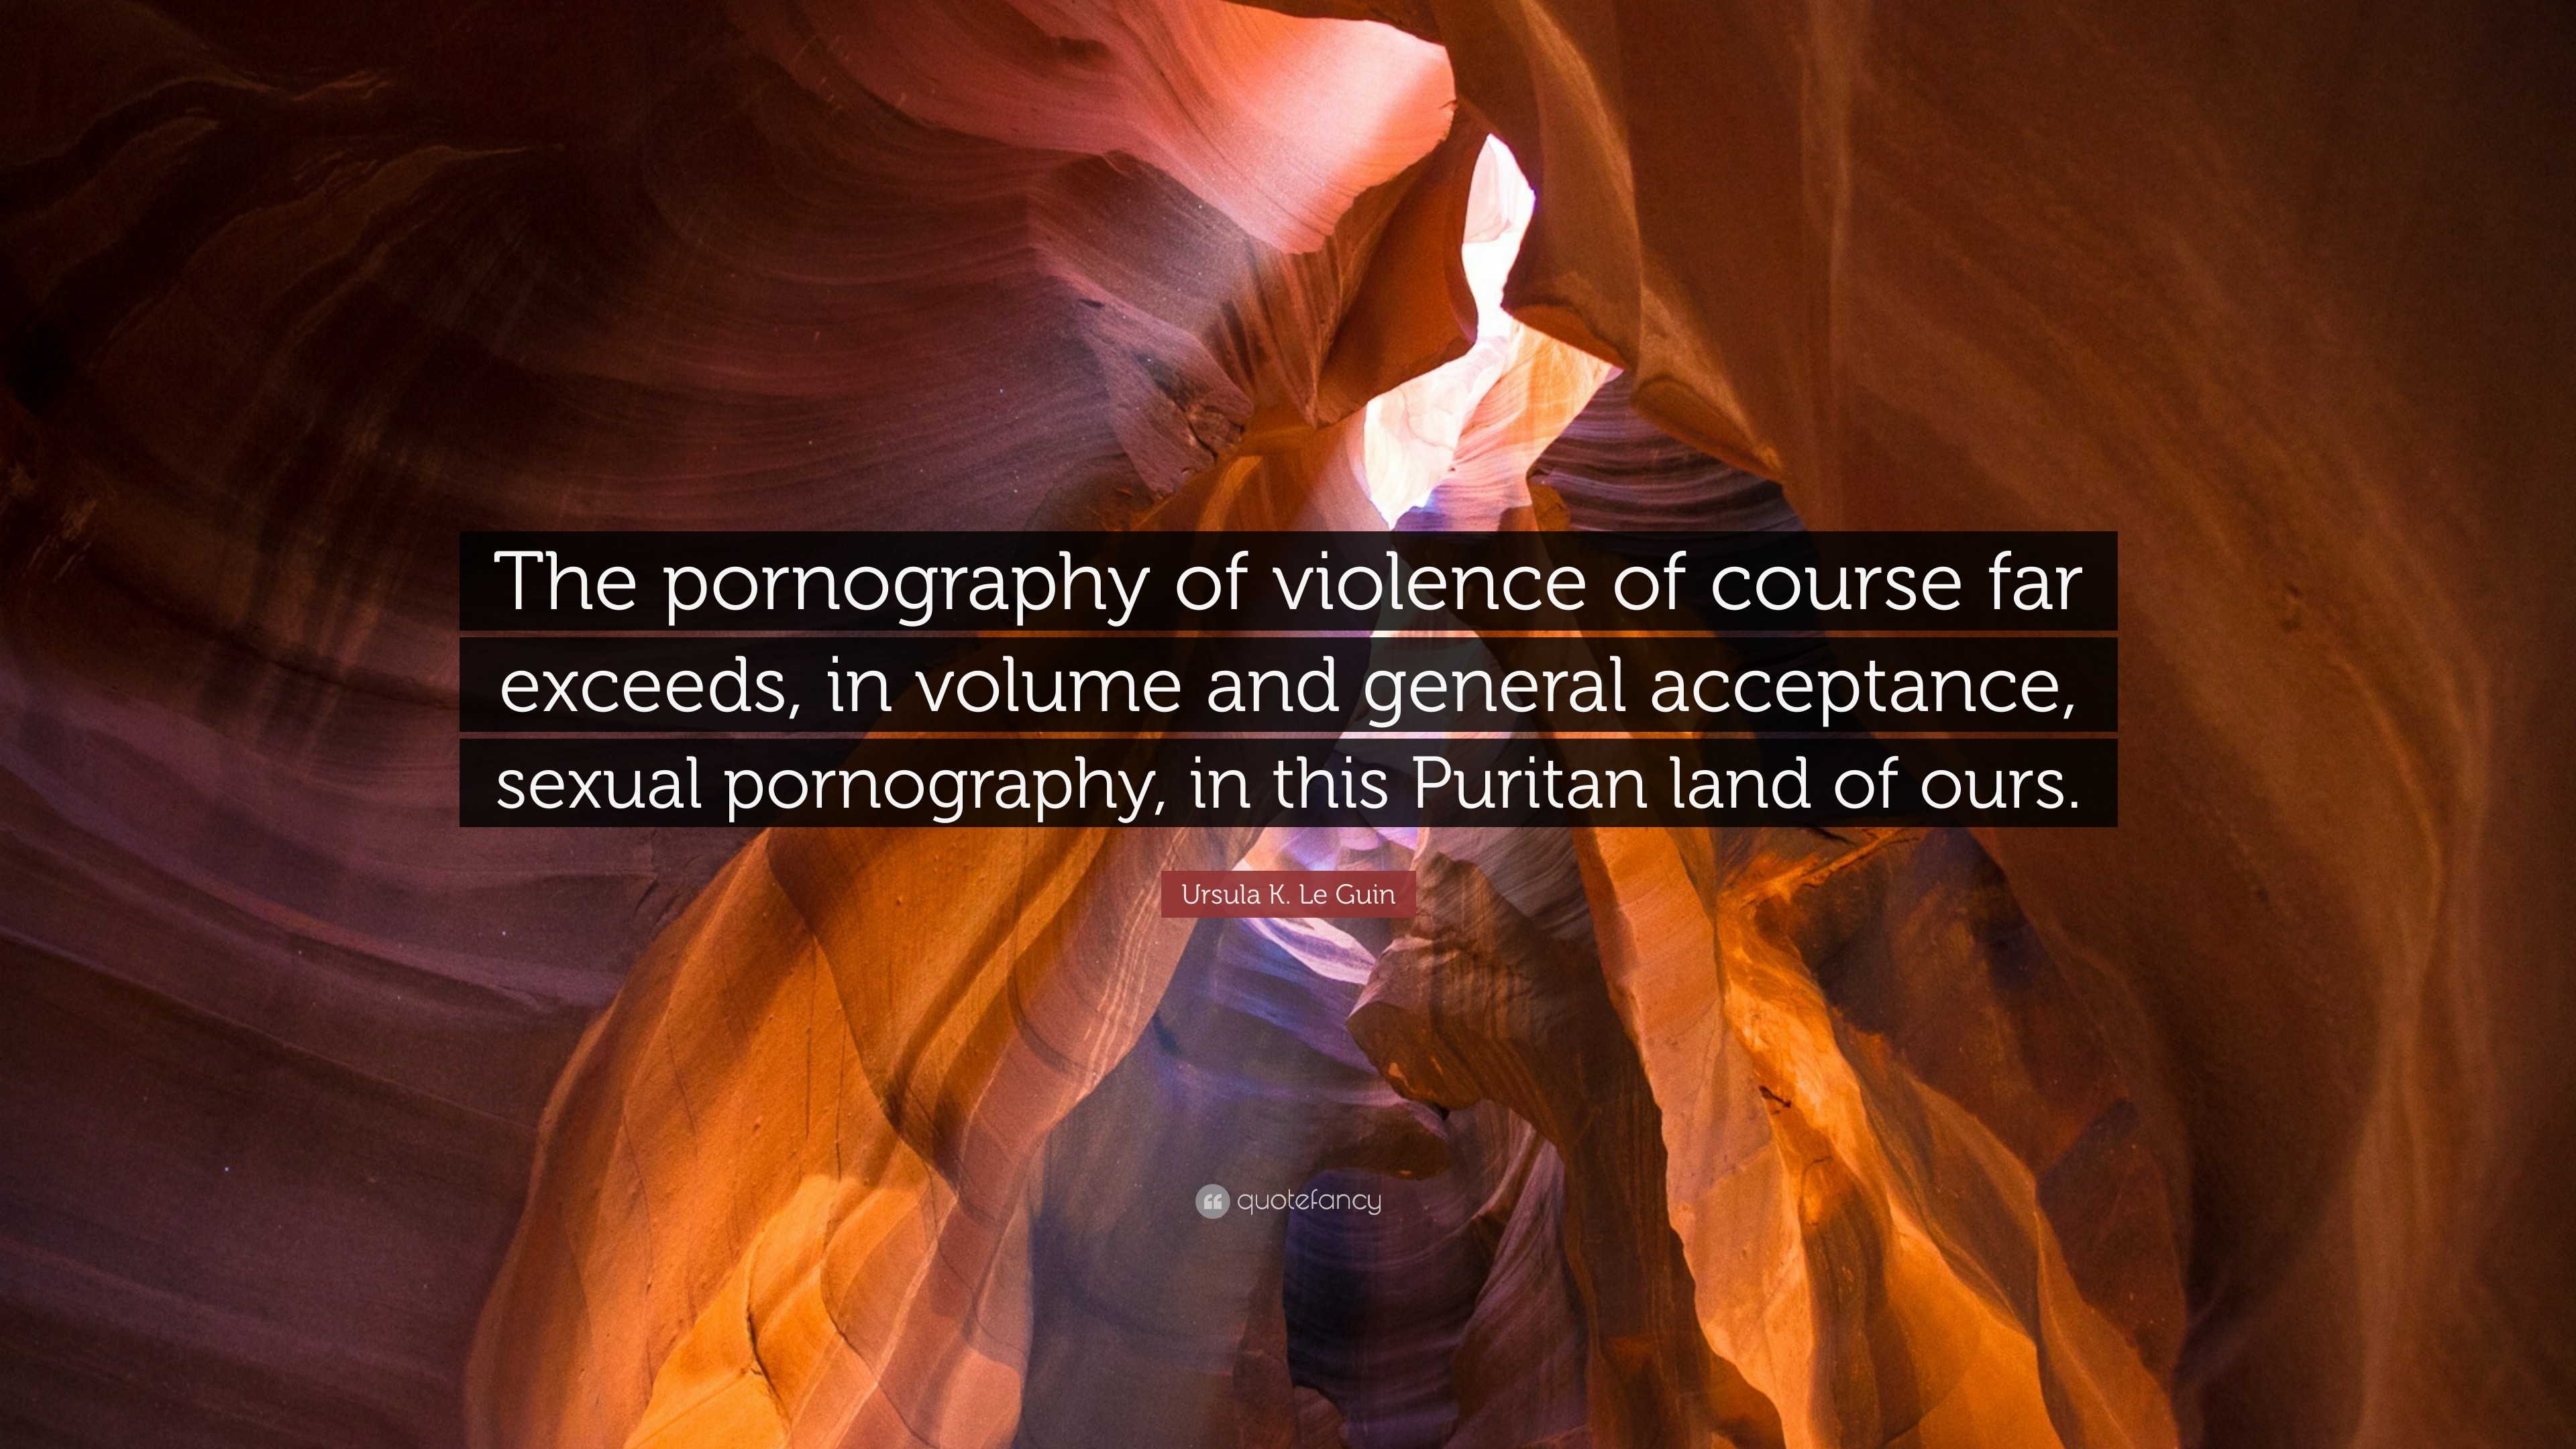 Ursula K. Le Guin Quote: â€œThe pornography of violence of course far  exceeds, in volume and general acceptance, sexual pornography, in this  Puritan...â€